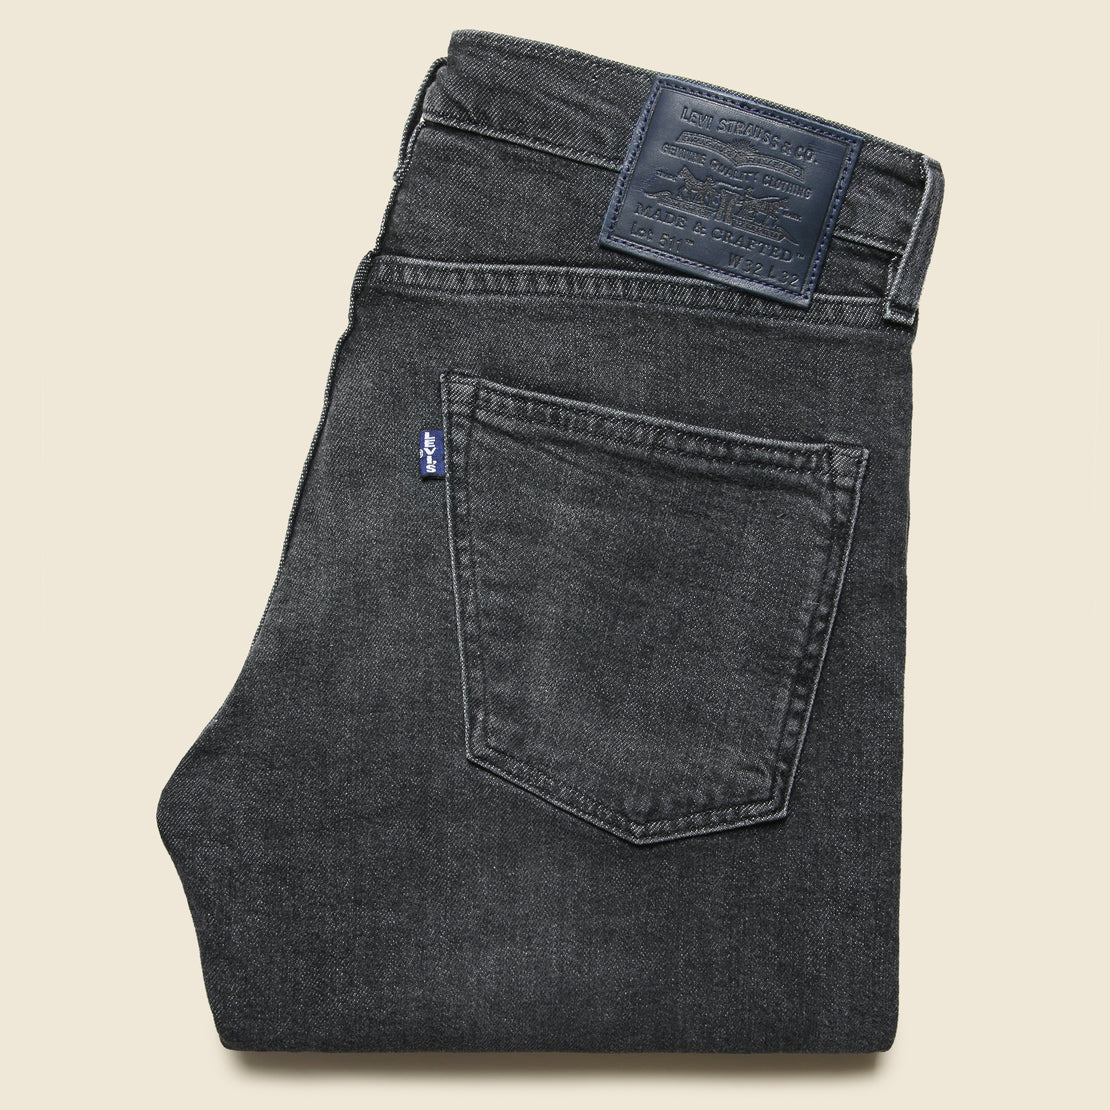 511 Slim Fit Jean - Crucible - Levis Made & Crafted - STAG Provisions - Pants - Denim